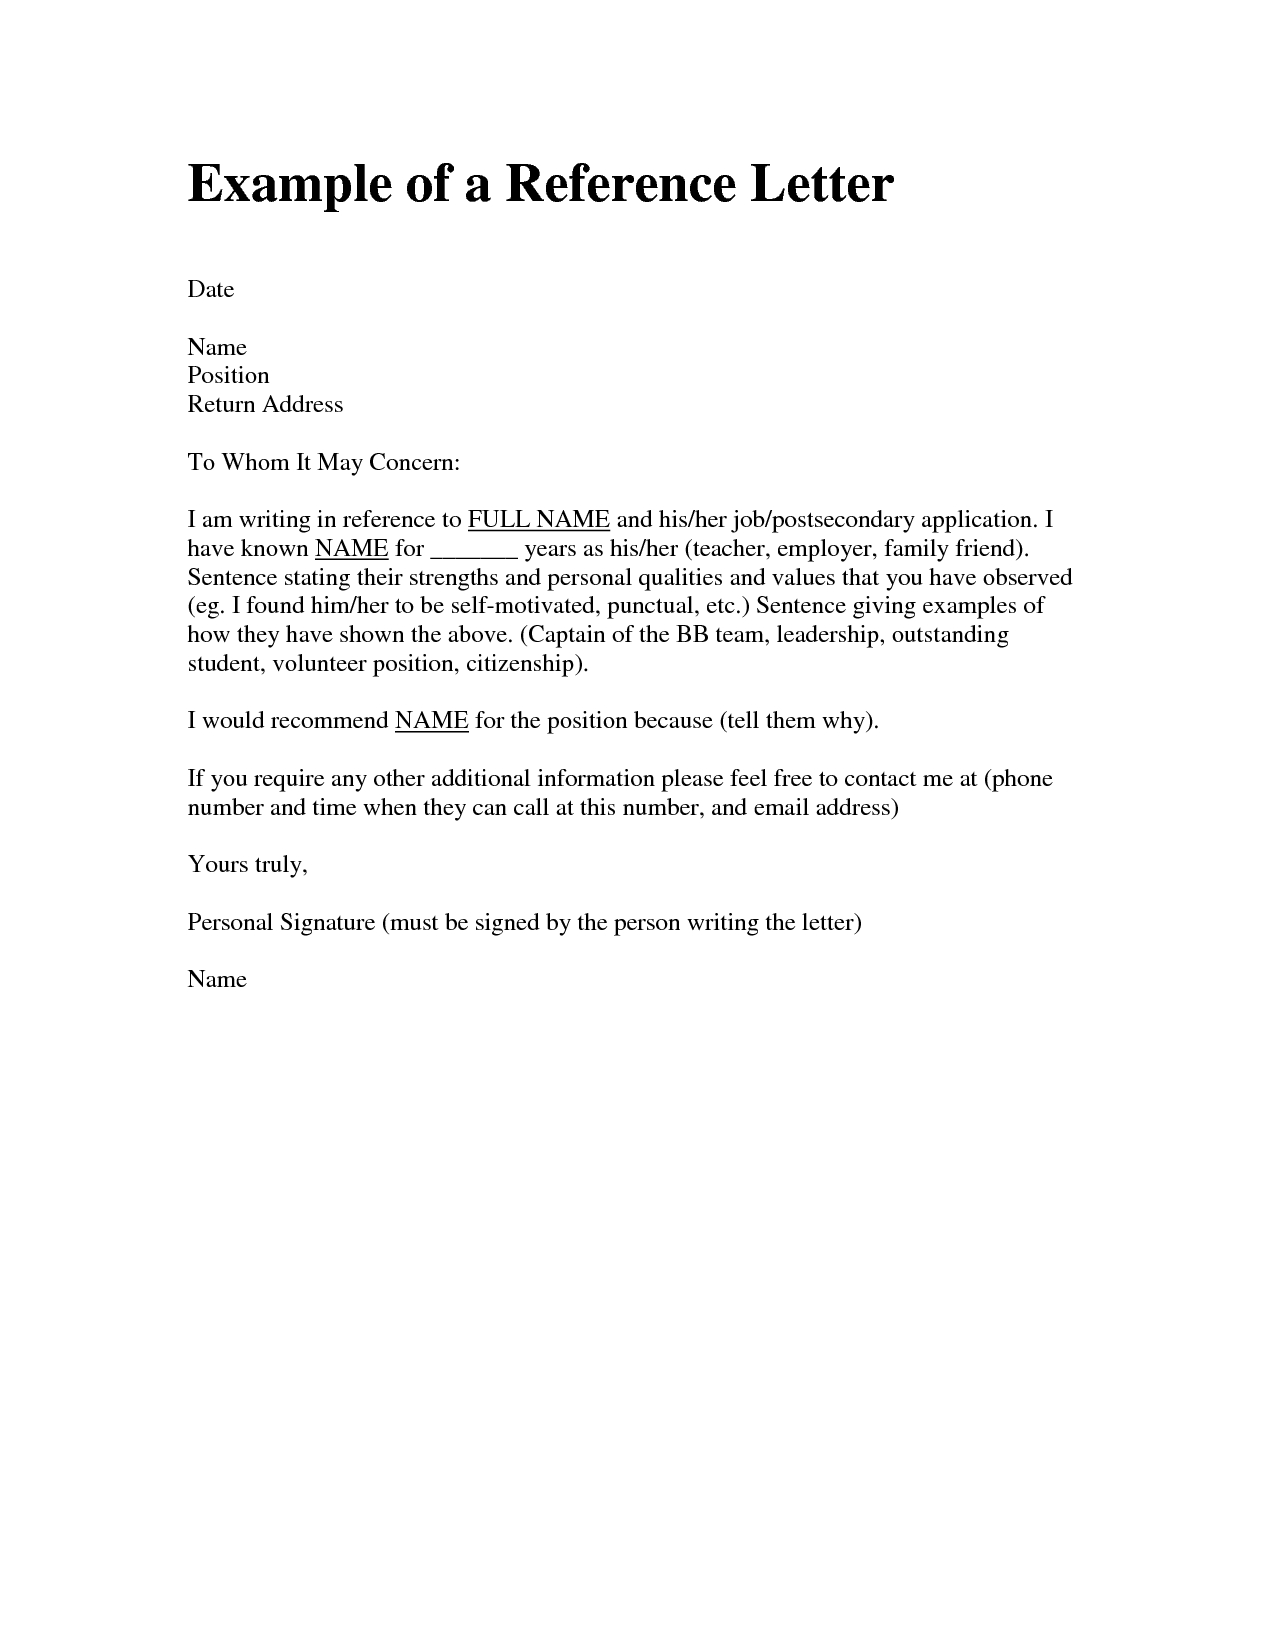 Personal Reference Letter Template Friend Enom inside dimensions 1275 X 1650